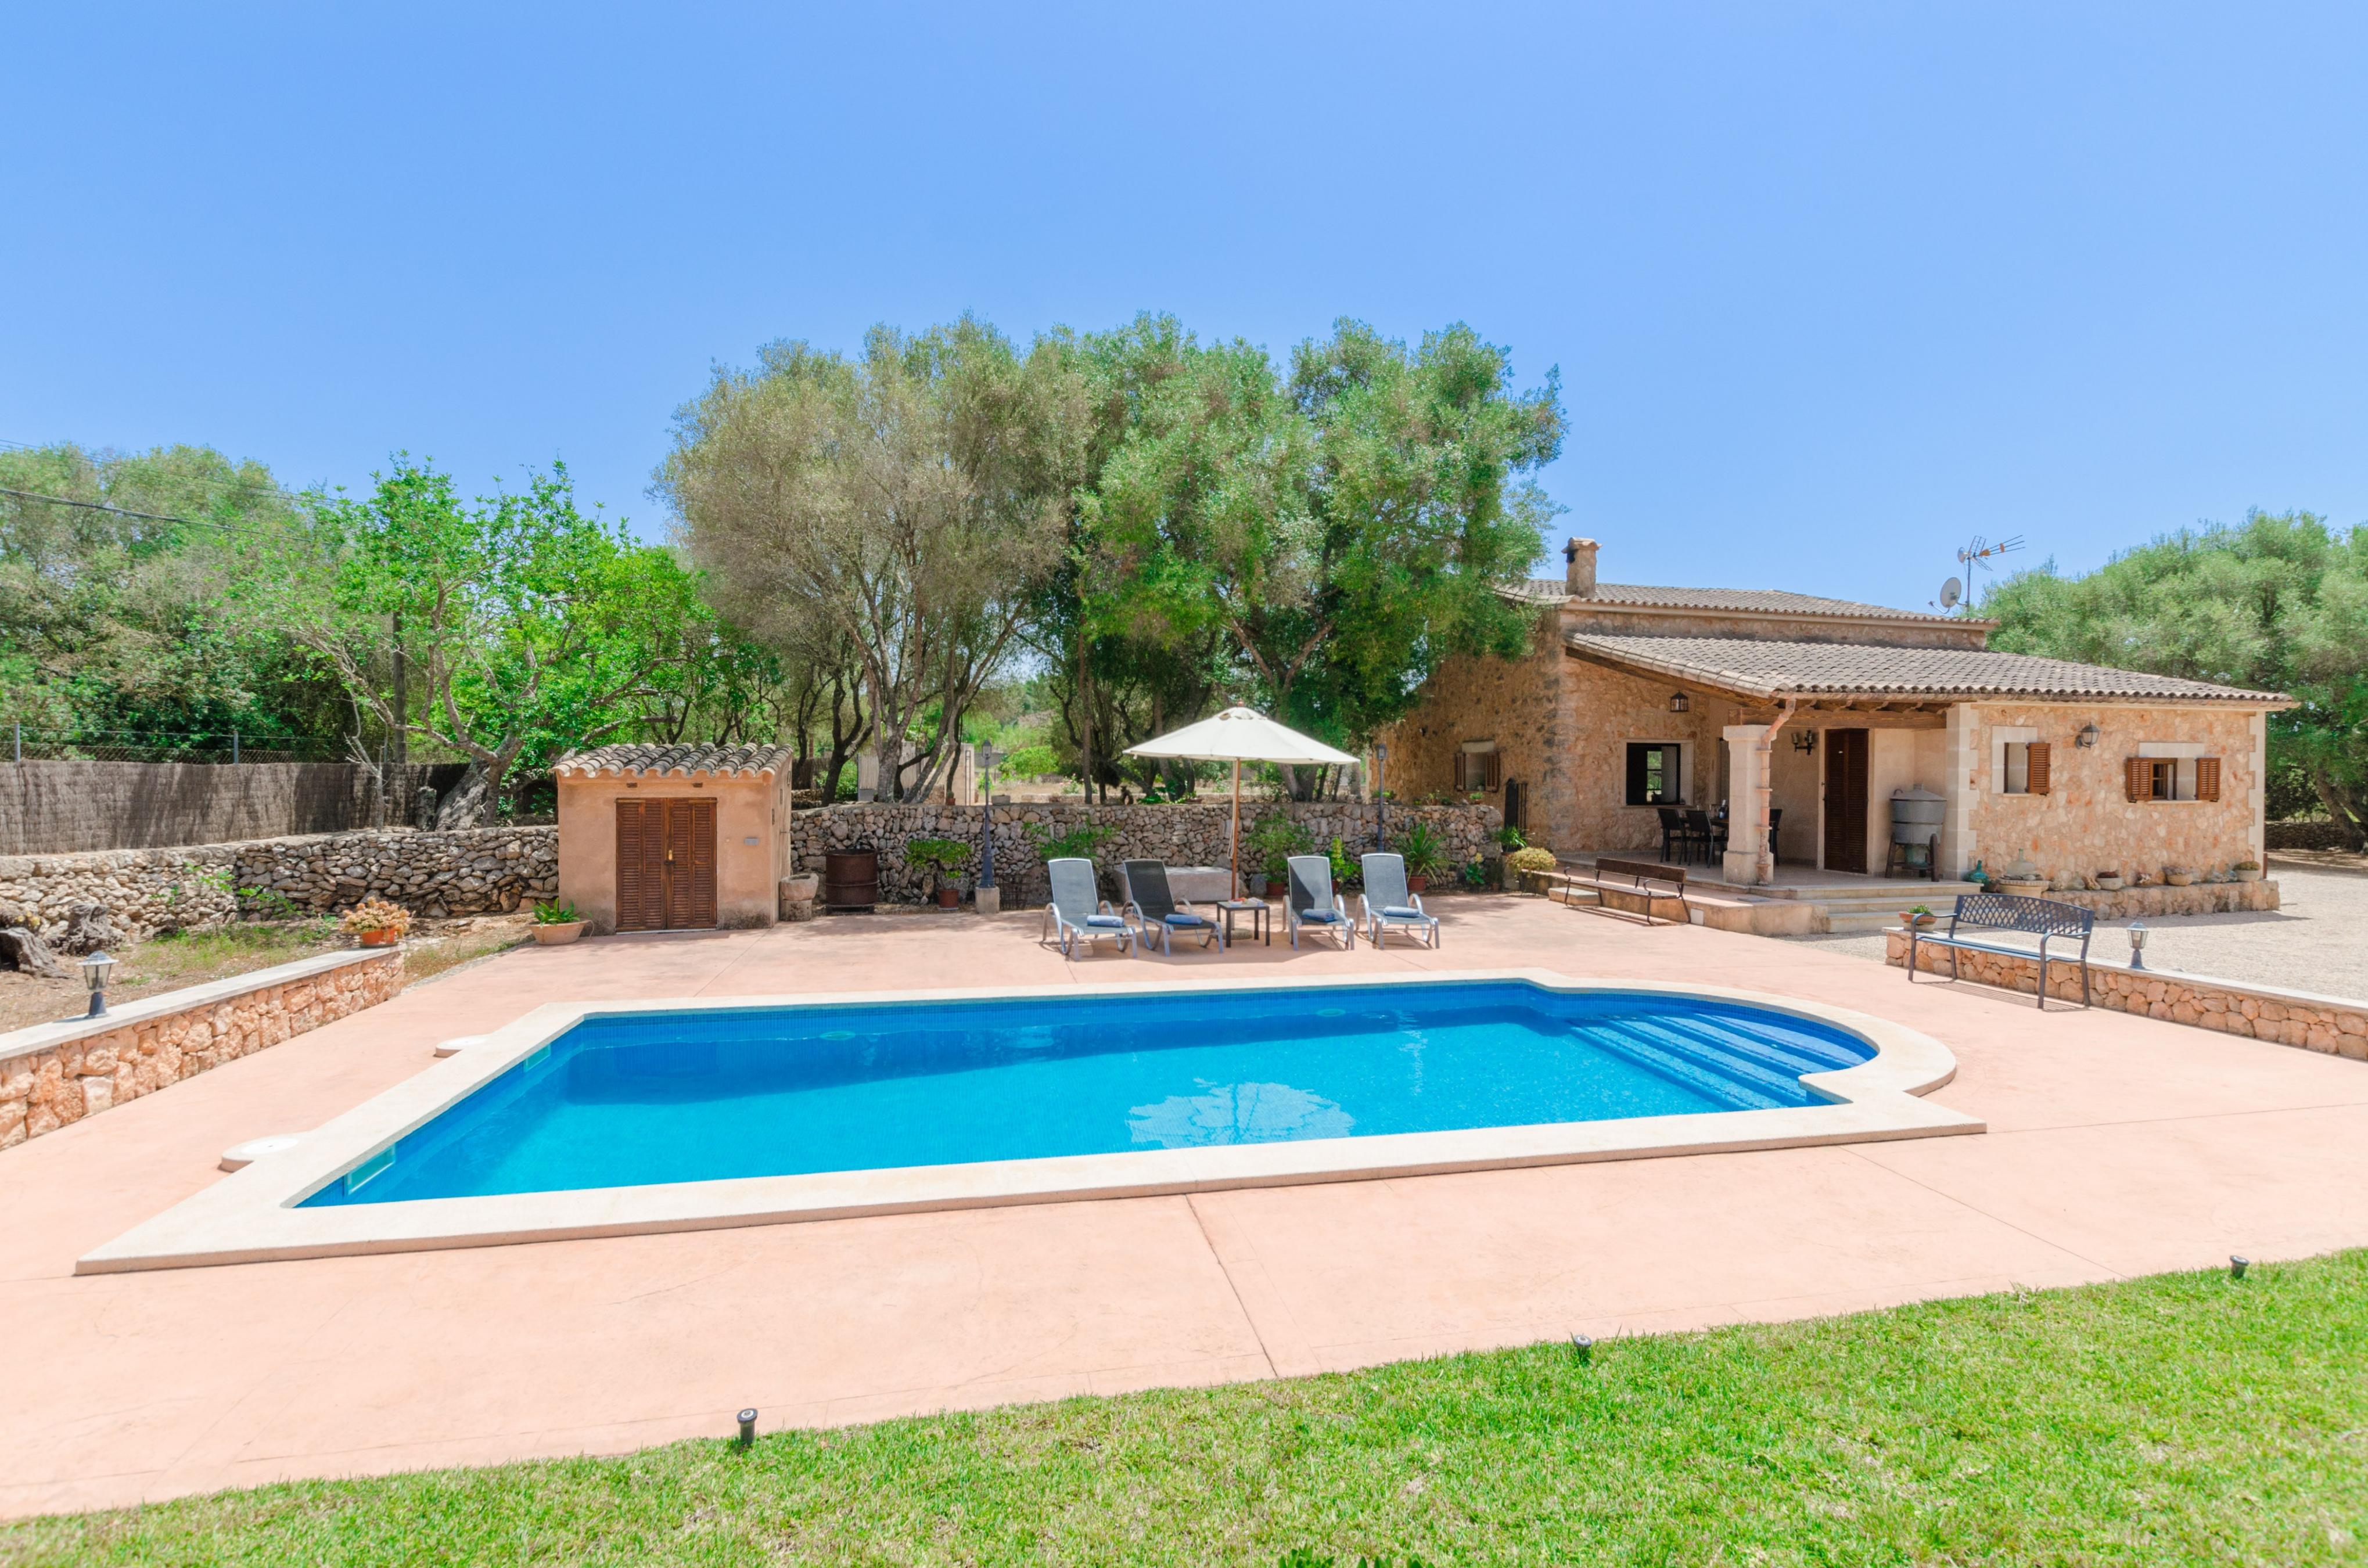 Property Image 1 - SON GARBI - Traditional villa with private pool in inland Mallorca. Free WiFi